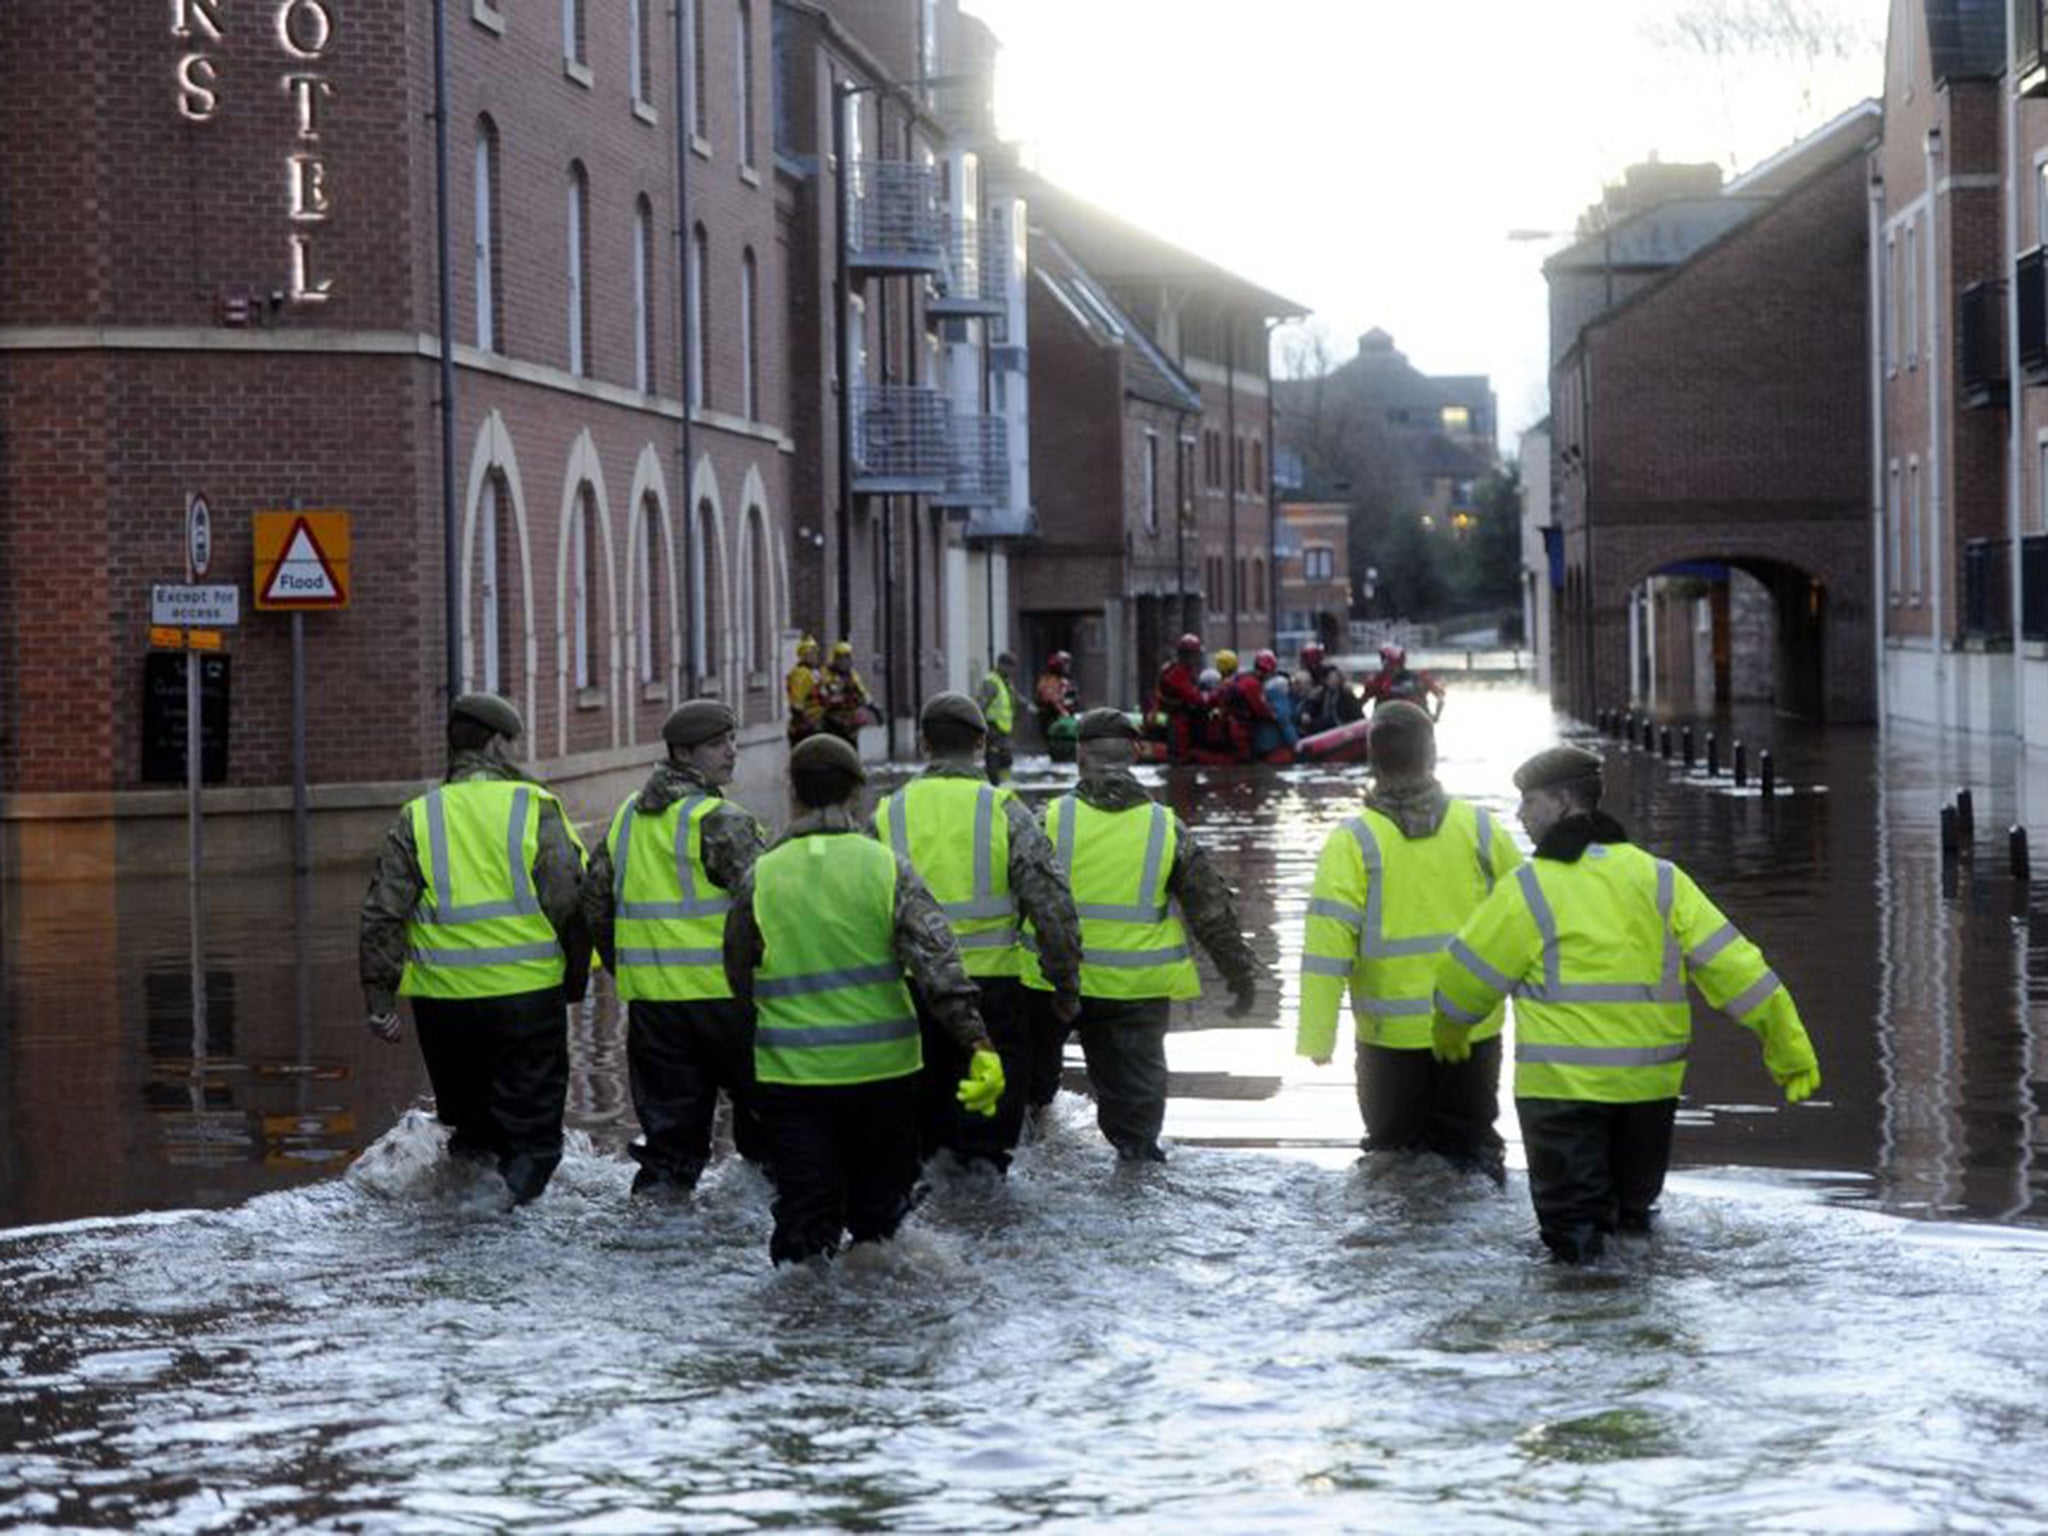 Members of the Army and rescue teams help evacuate people from flooded properties after they became trapped by rising floodwater when the River Ouse bursts its banks in York city centre.